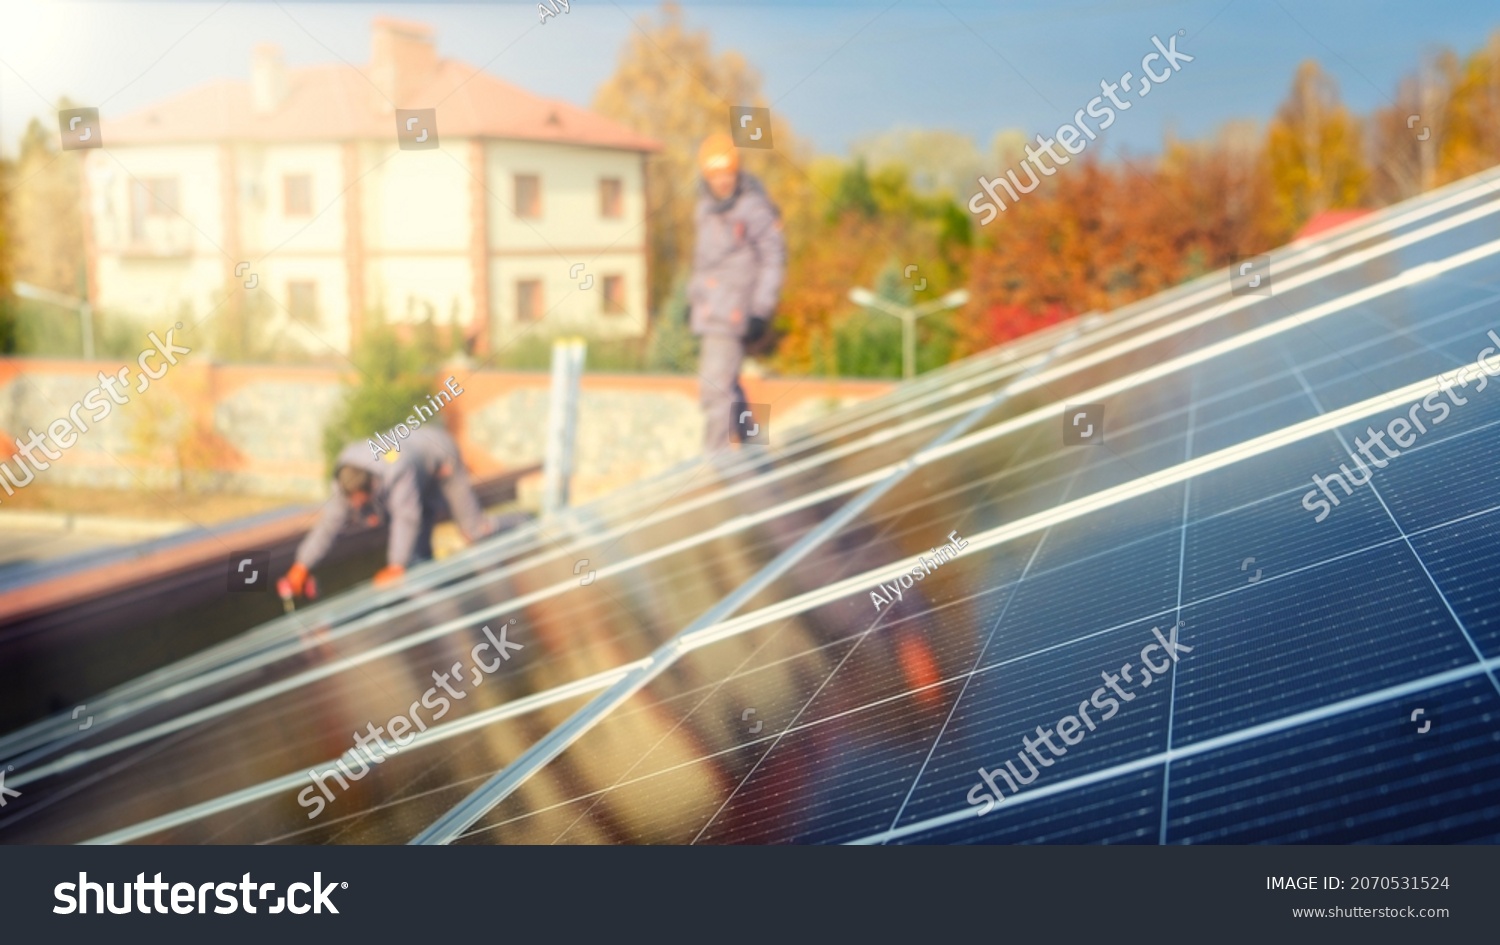 Solar panels on the roof of the building in the sun with workers. For alternative energy design. Selective focus. Blur #2070531524